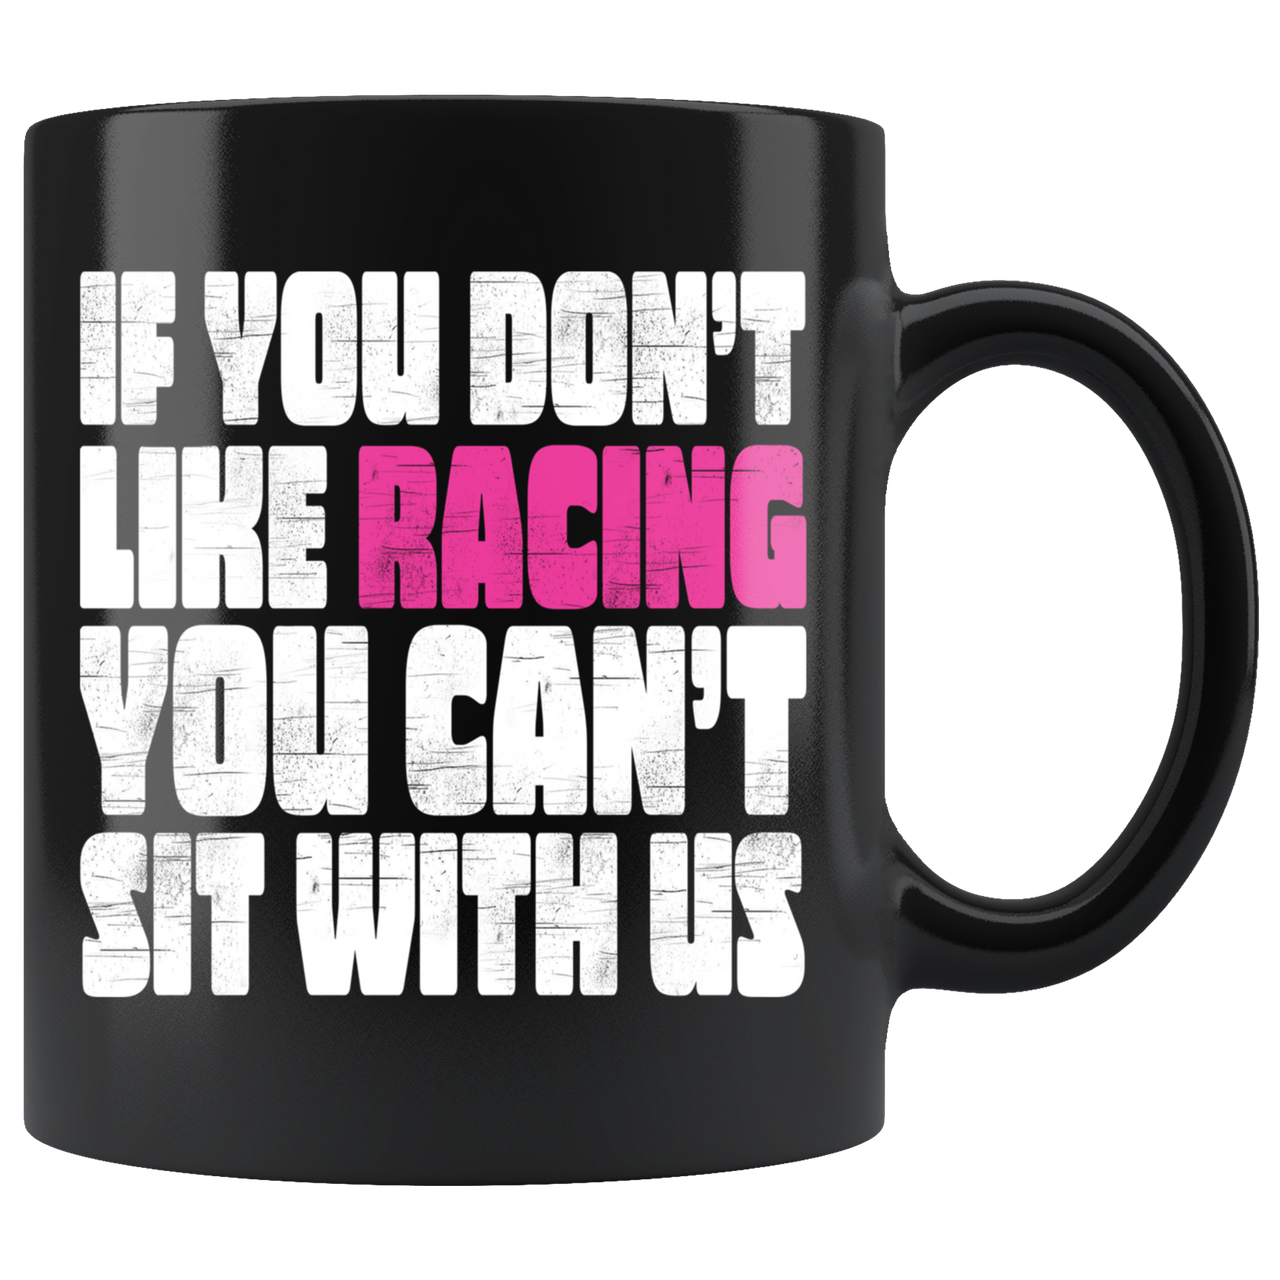 If You Don't Like Racing Don't Sit With Us Mug!